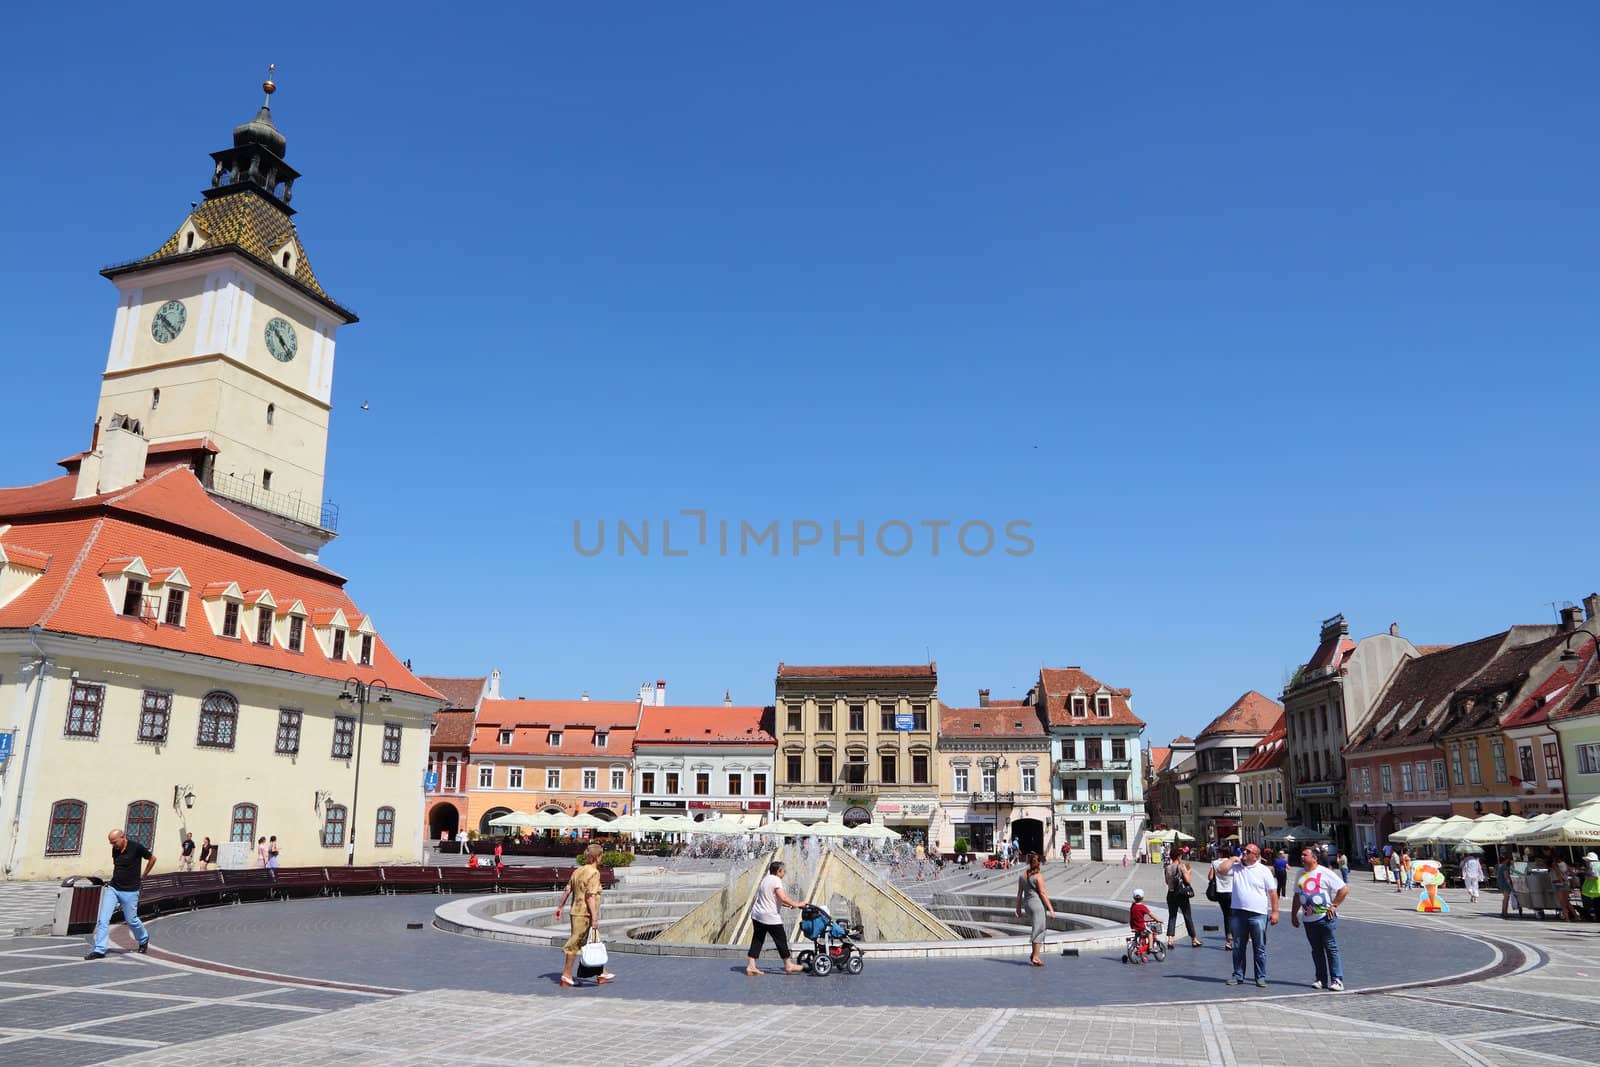 BRASOV, ROMANIA - AUGUST 21: Tourists stroll at main square on August 21, 2012 in Brasov, Romania. Brasov is a popular tourism destination with 581,983 arrivals in Brasov County in 2008.